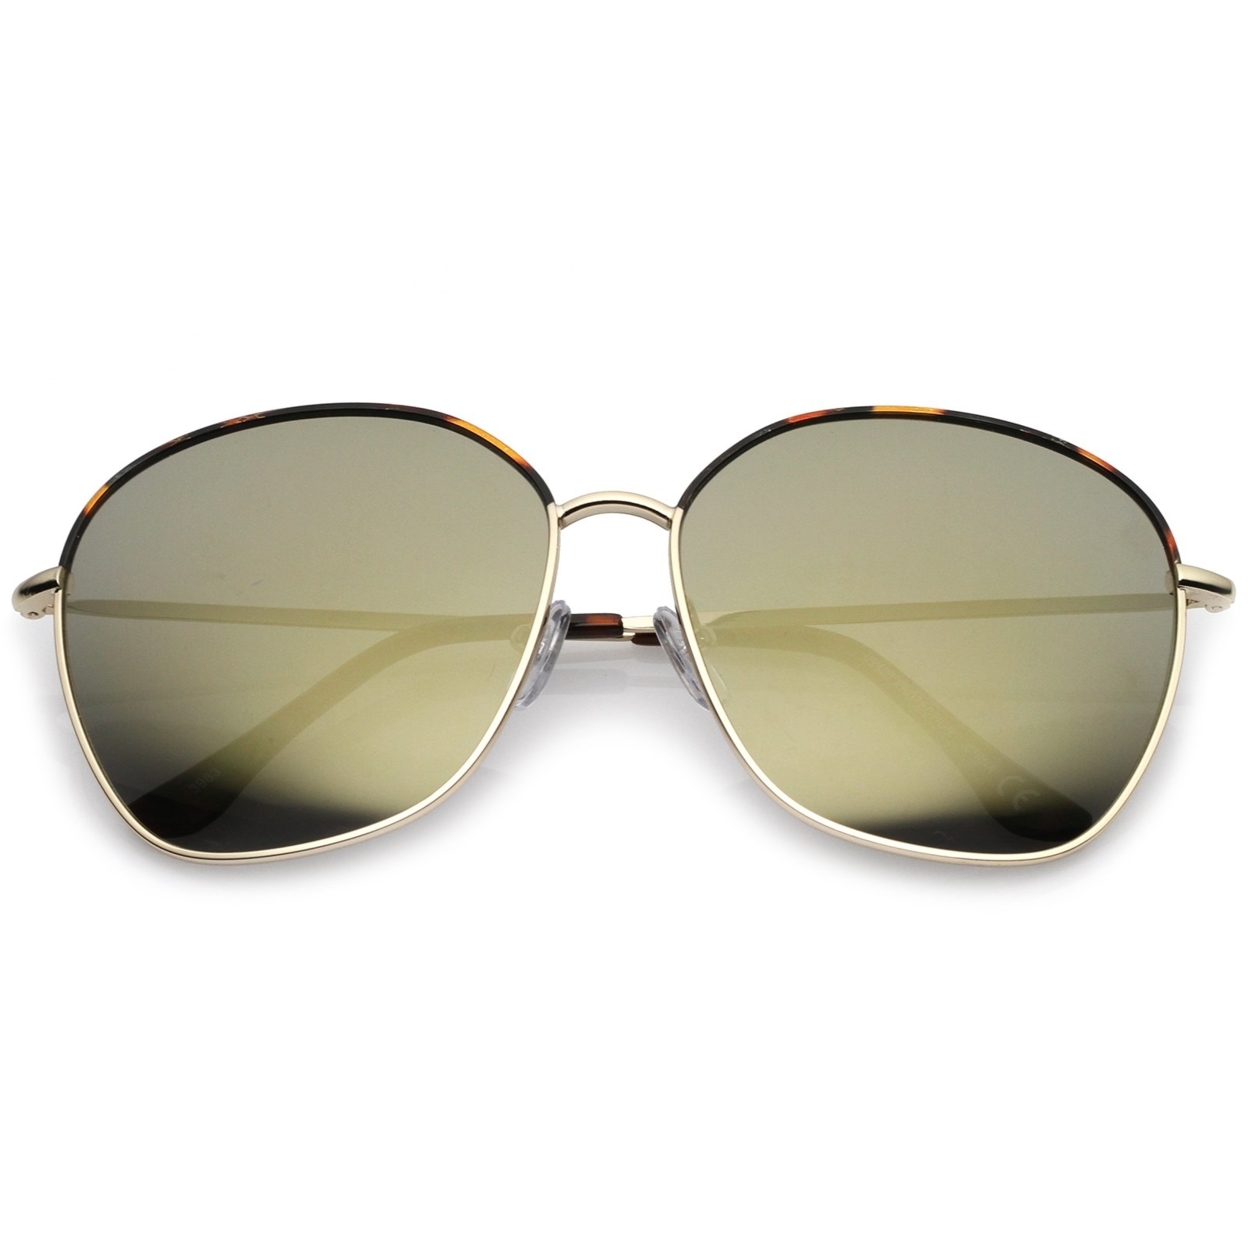 Mod Oversize Two-Toned Metal Frame Slim Temples Square Sunglasses 61mm - Tortoise-Gold / Green Mirror